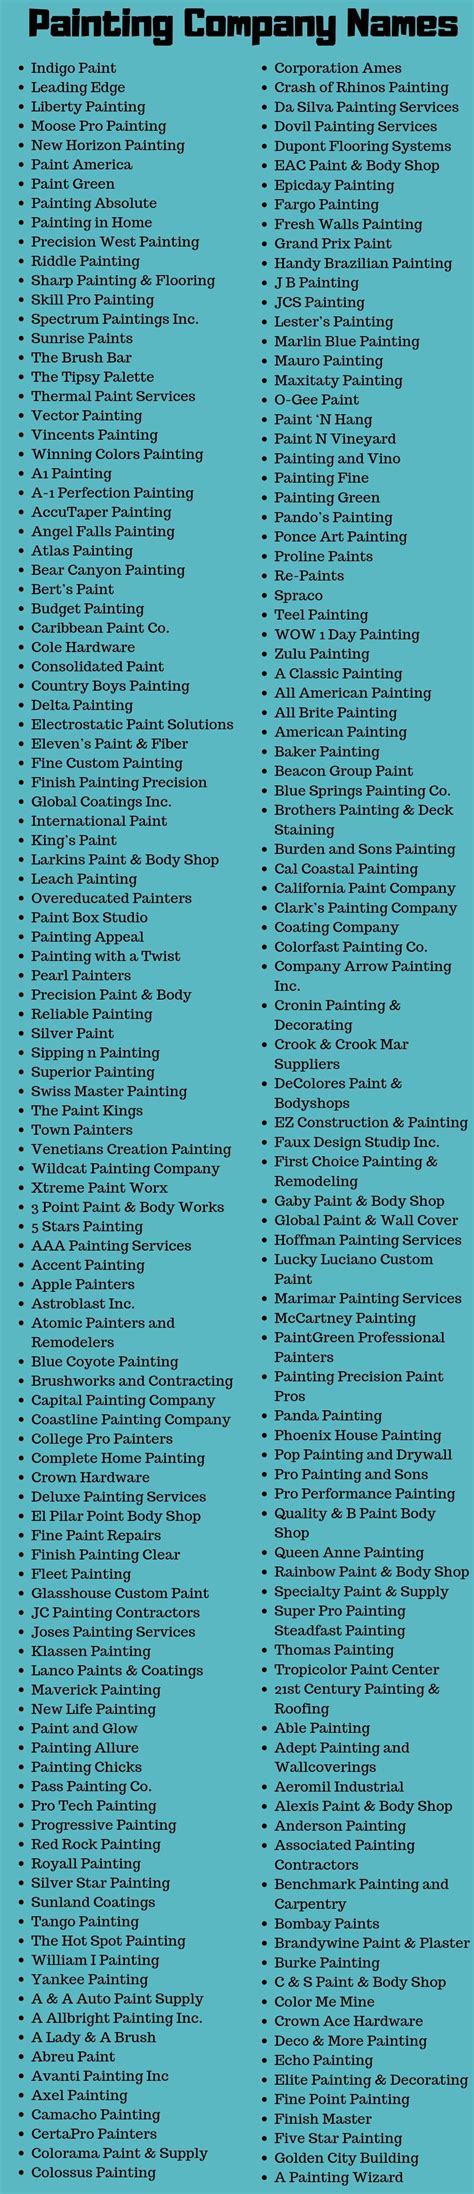 370 Painting Company Names Ideas And Suggestions